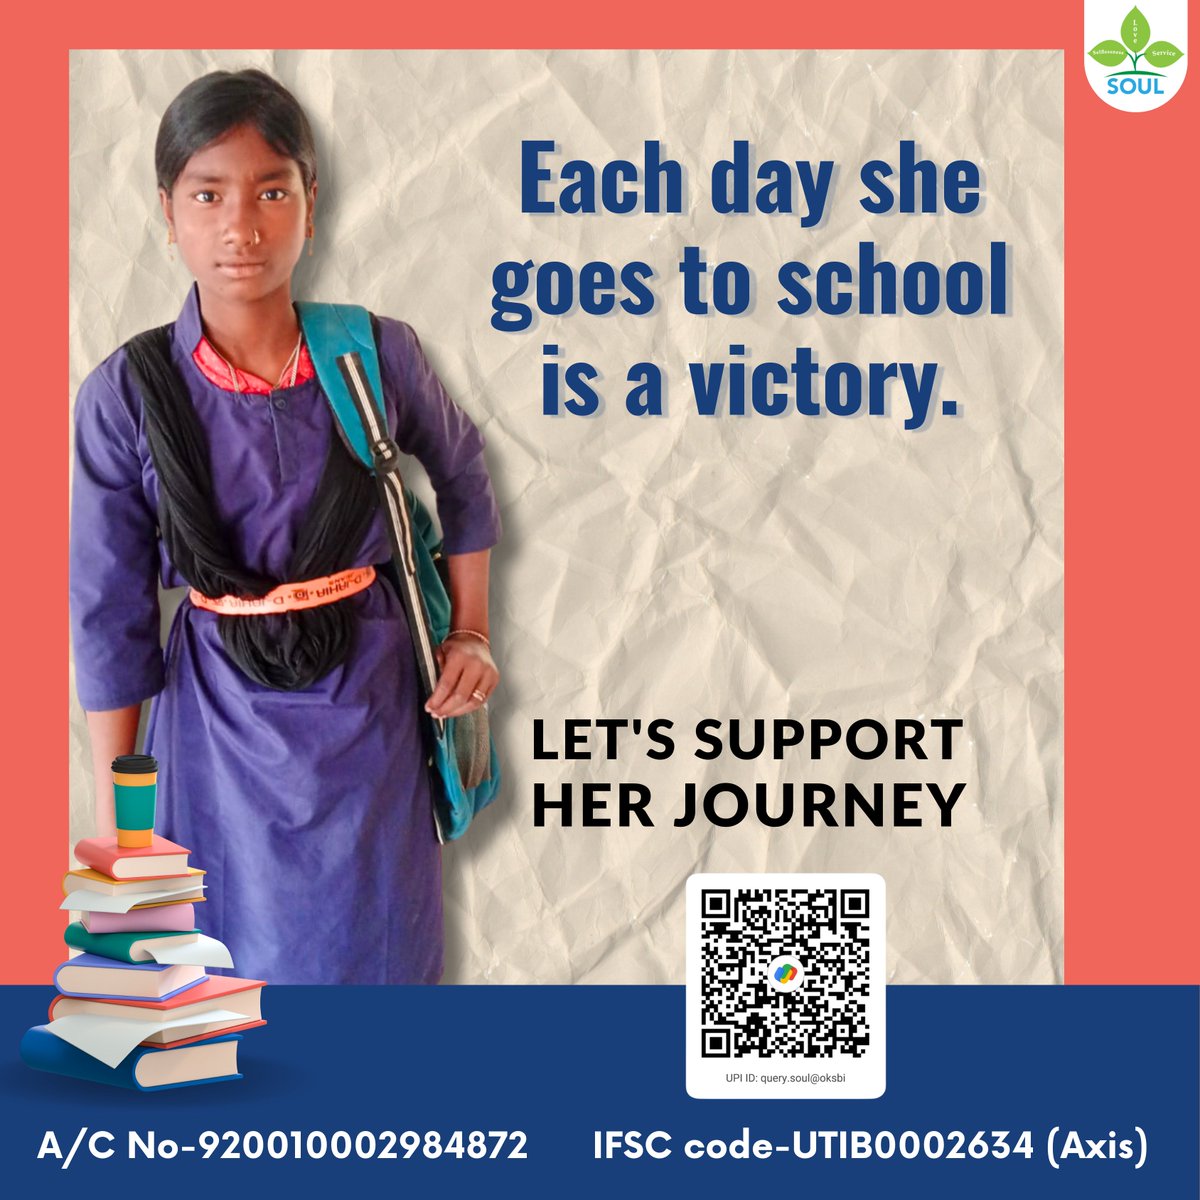 Each day she goes to school is a victory. Let's support her journey

#empowergirls #soulngosundarban #EducationForChange